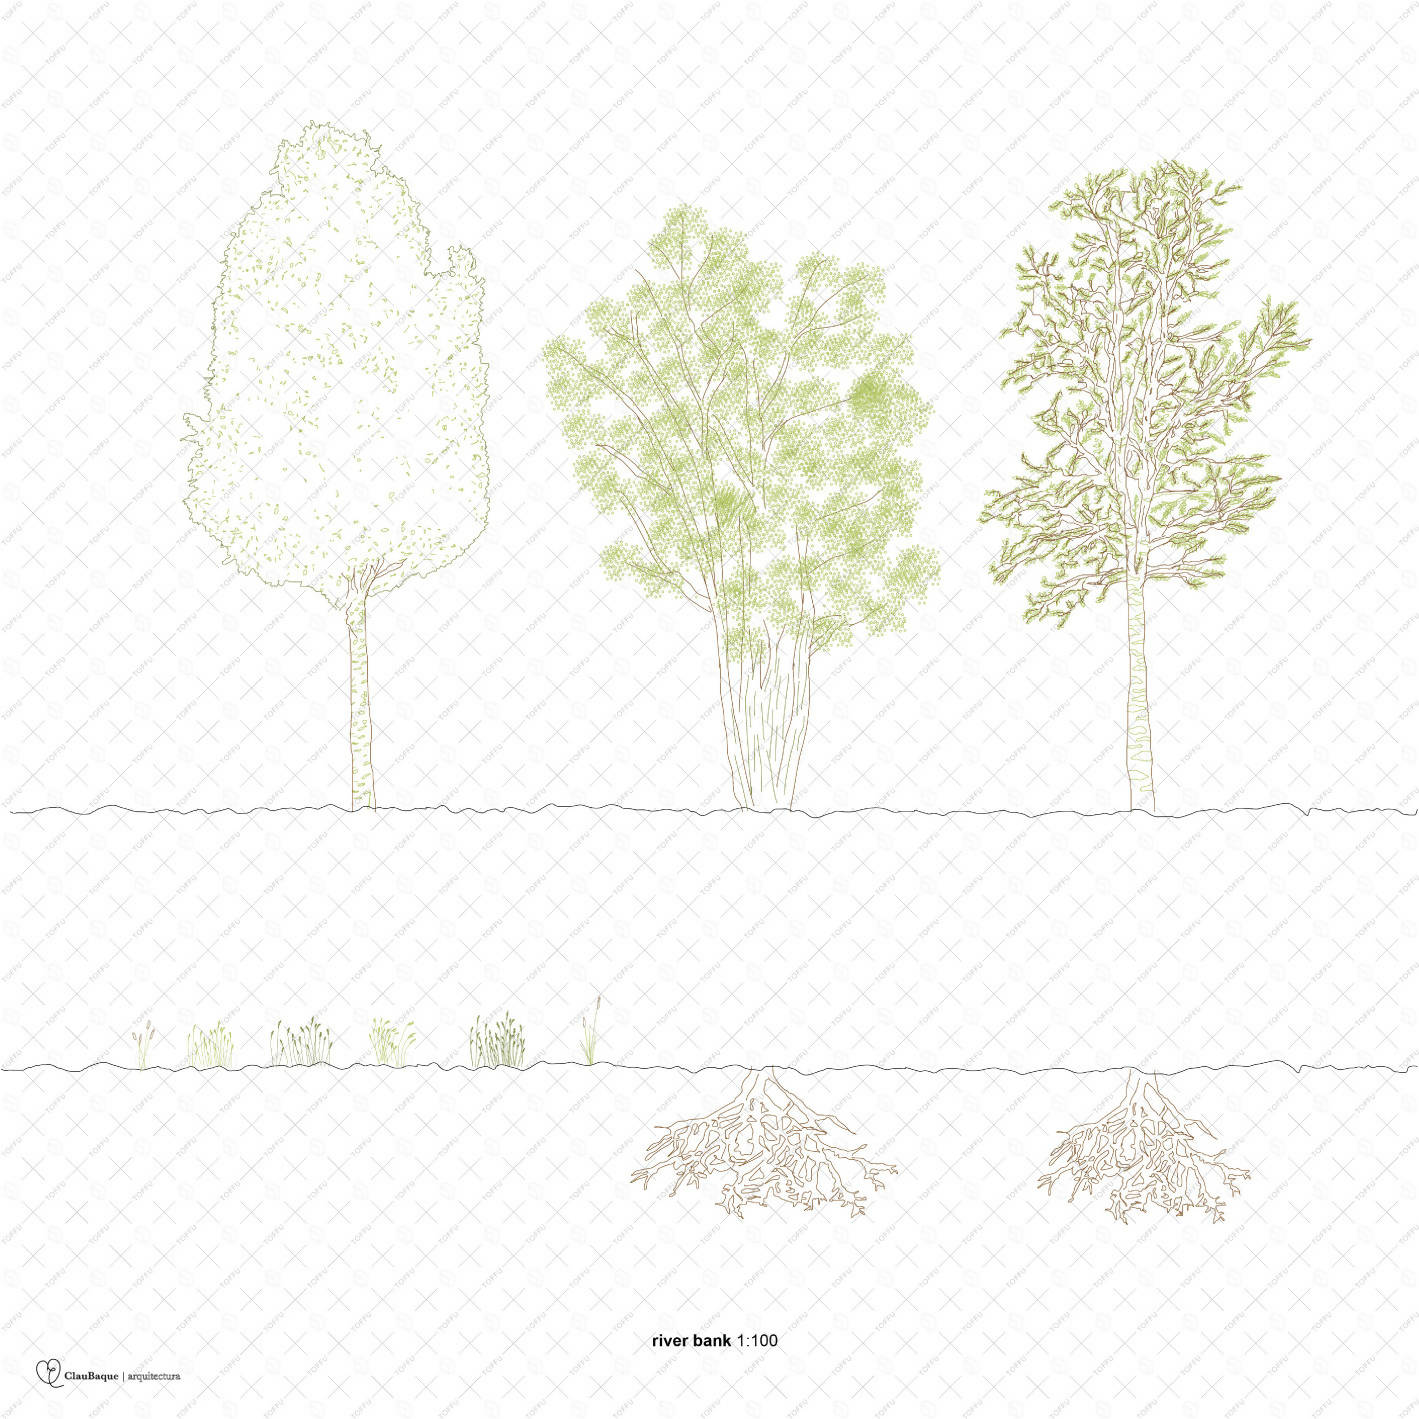 Cad River Bank Forest DWG | Toffu Co